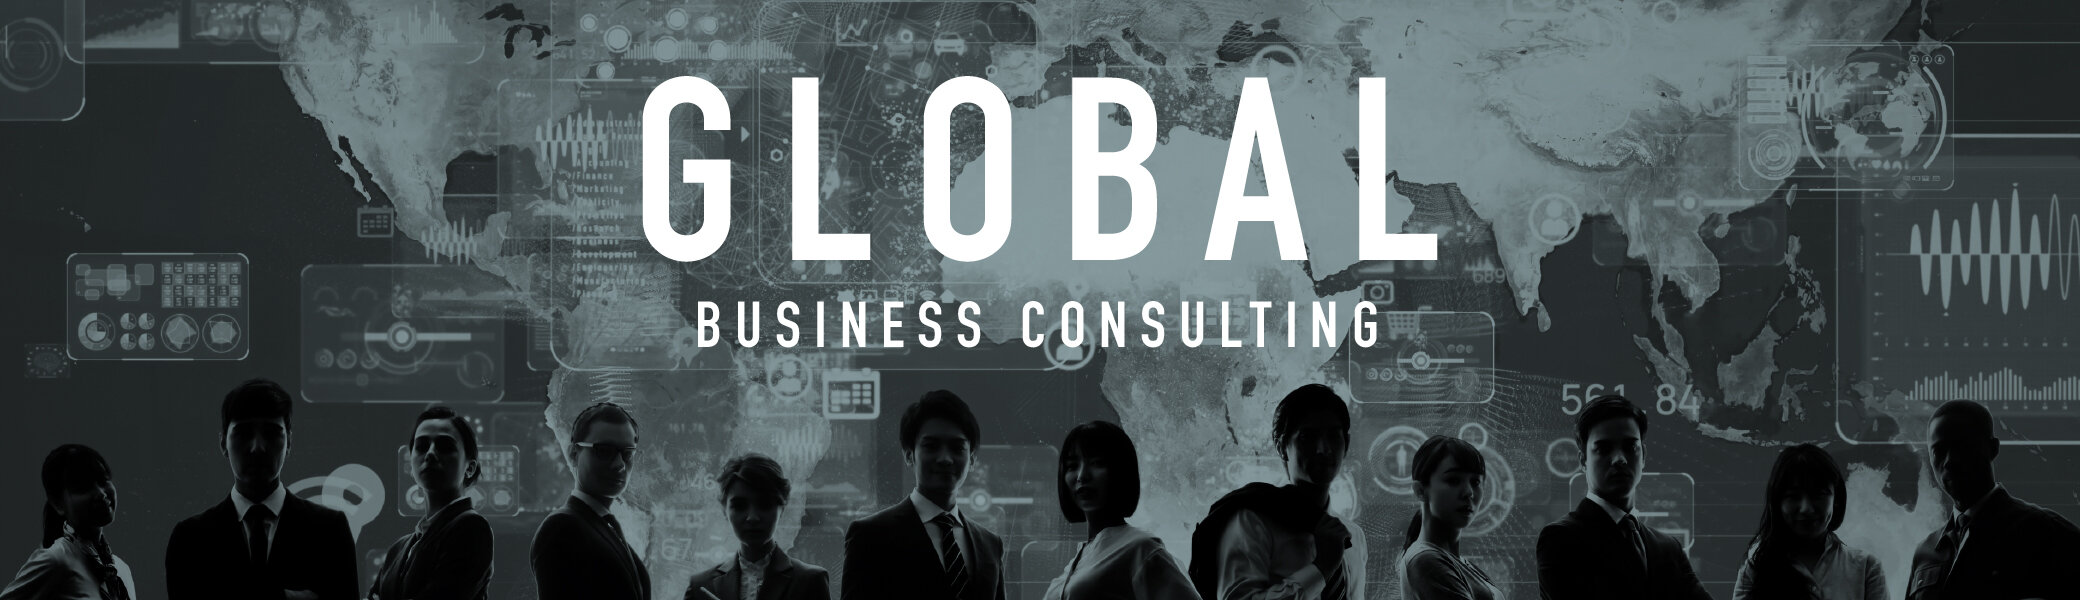 GLOBAL BUSINESS CONSULTING